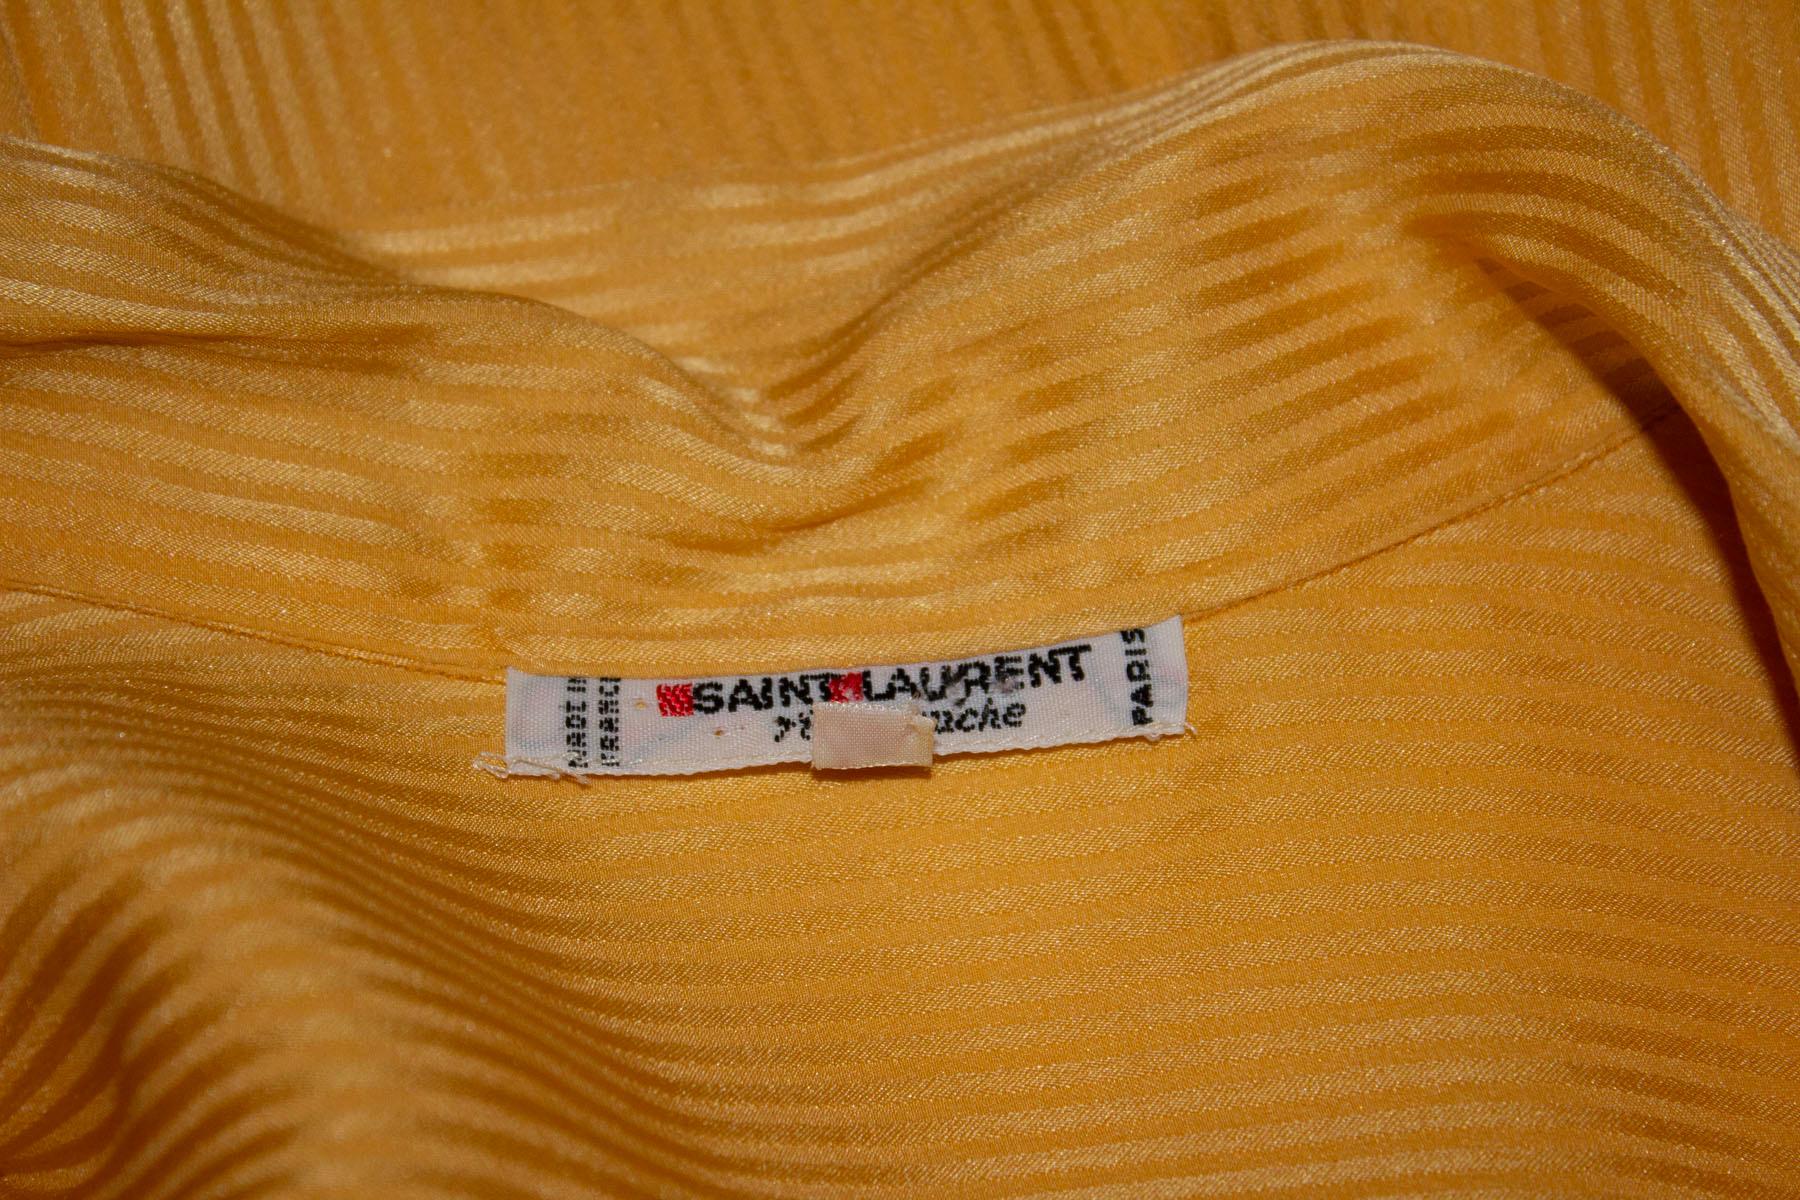 Vintage Yves Saint Laurent Rive Gauche Silk Blouse In Good Condition For Sale In London, GB